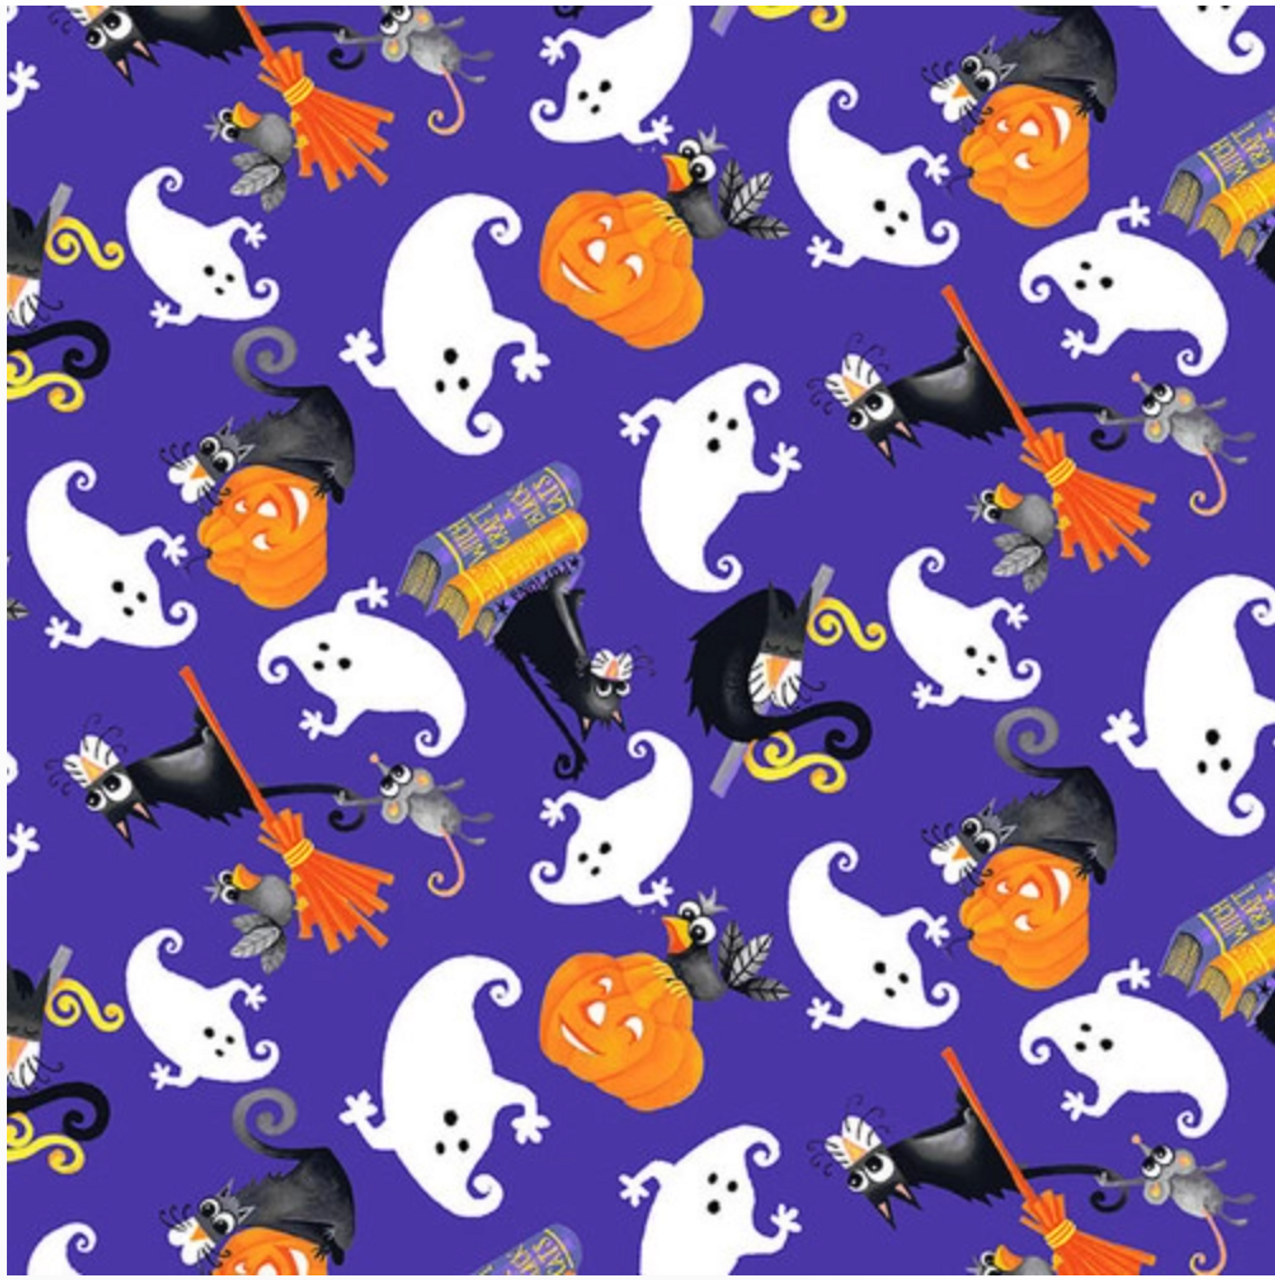 Henry Glass Boo! Glow Tossed Cats & Ghosts Multi Fabric By The Yard